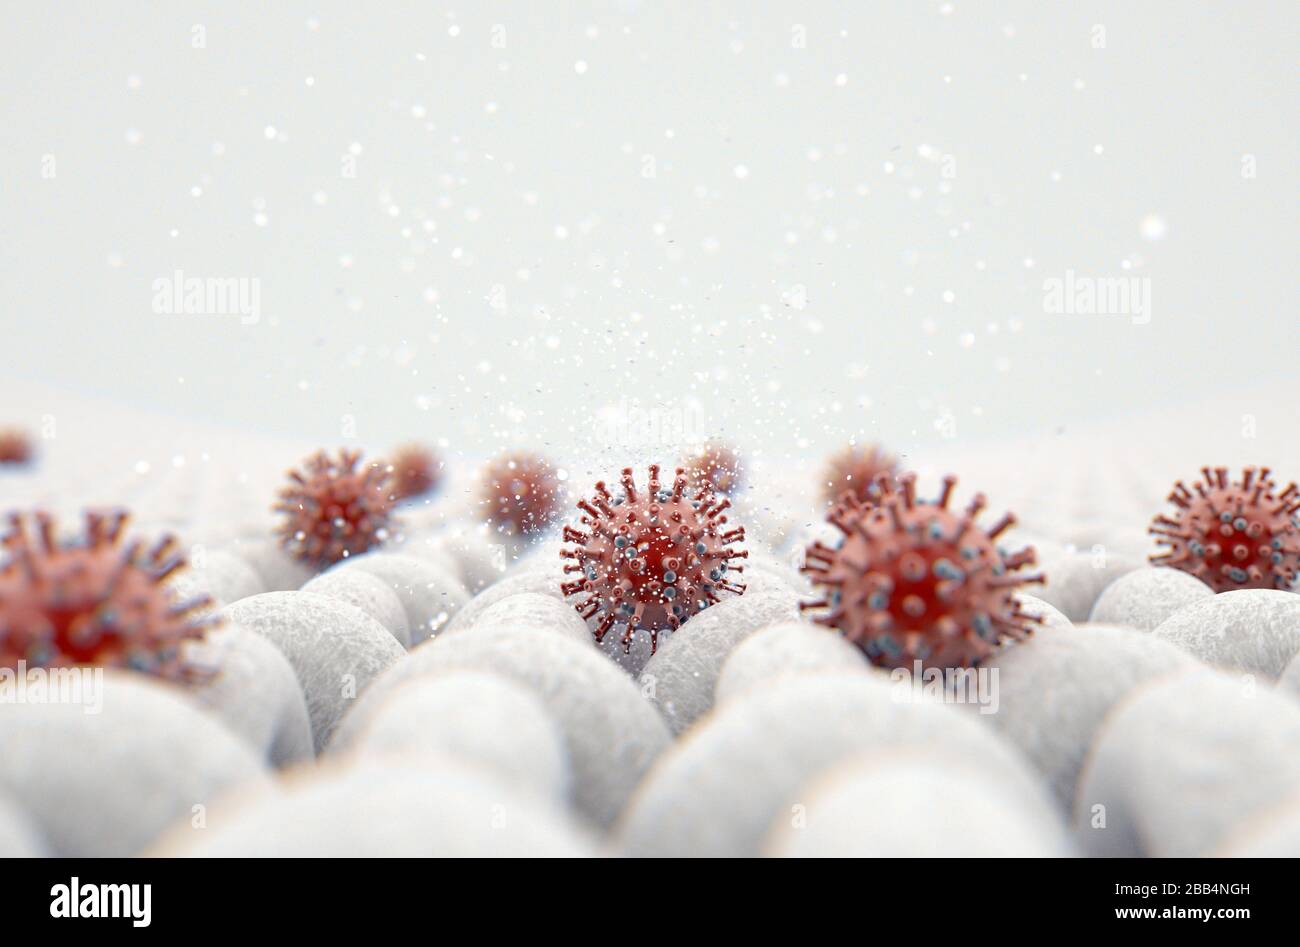 A microscopic close up view of a simple woven textile and a visible red coronavirus particle  - 3D render Stock Photo